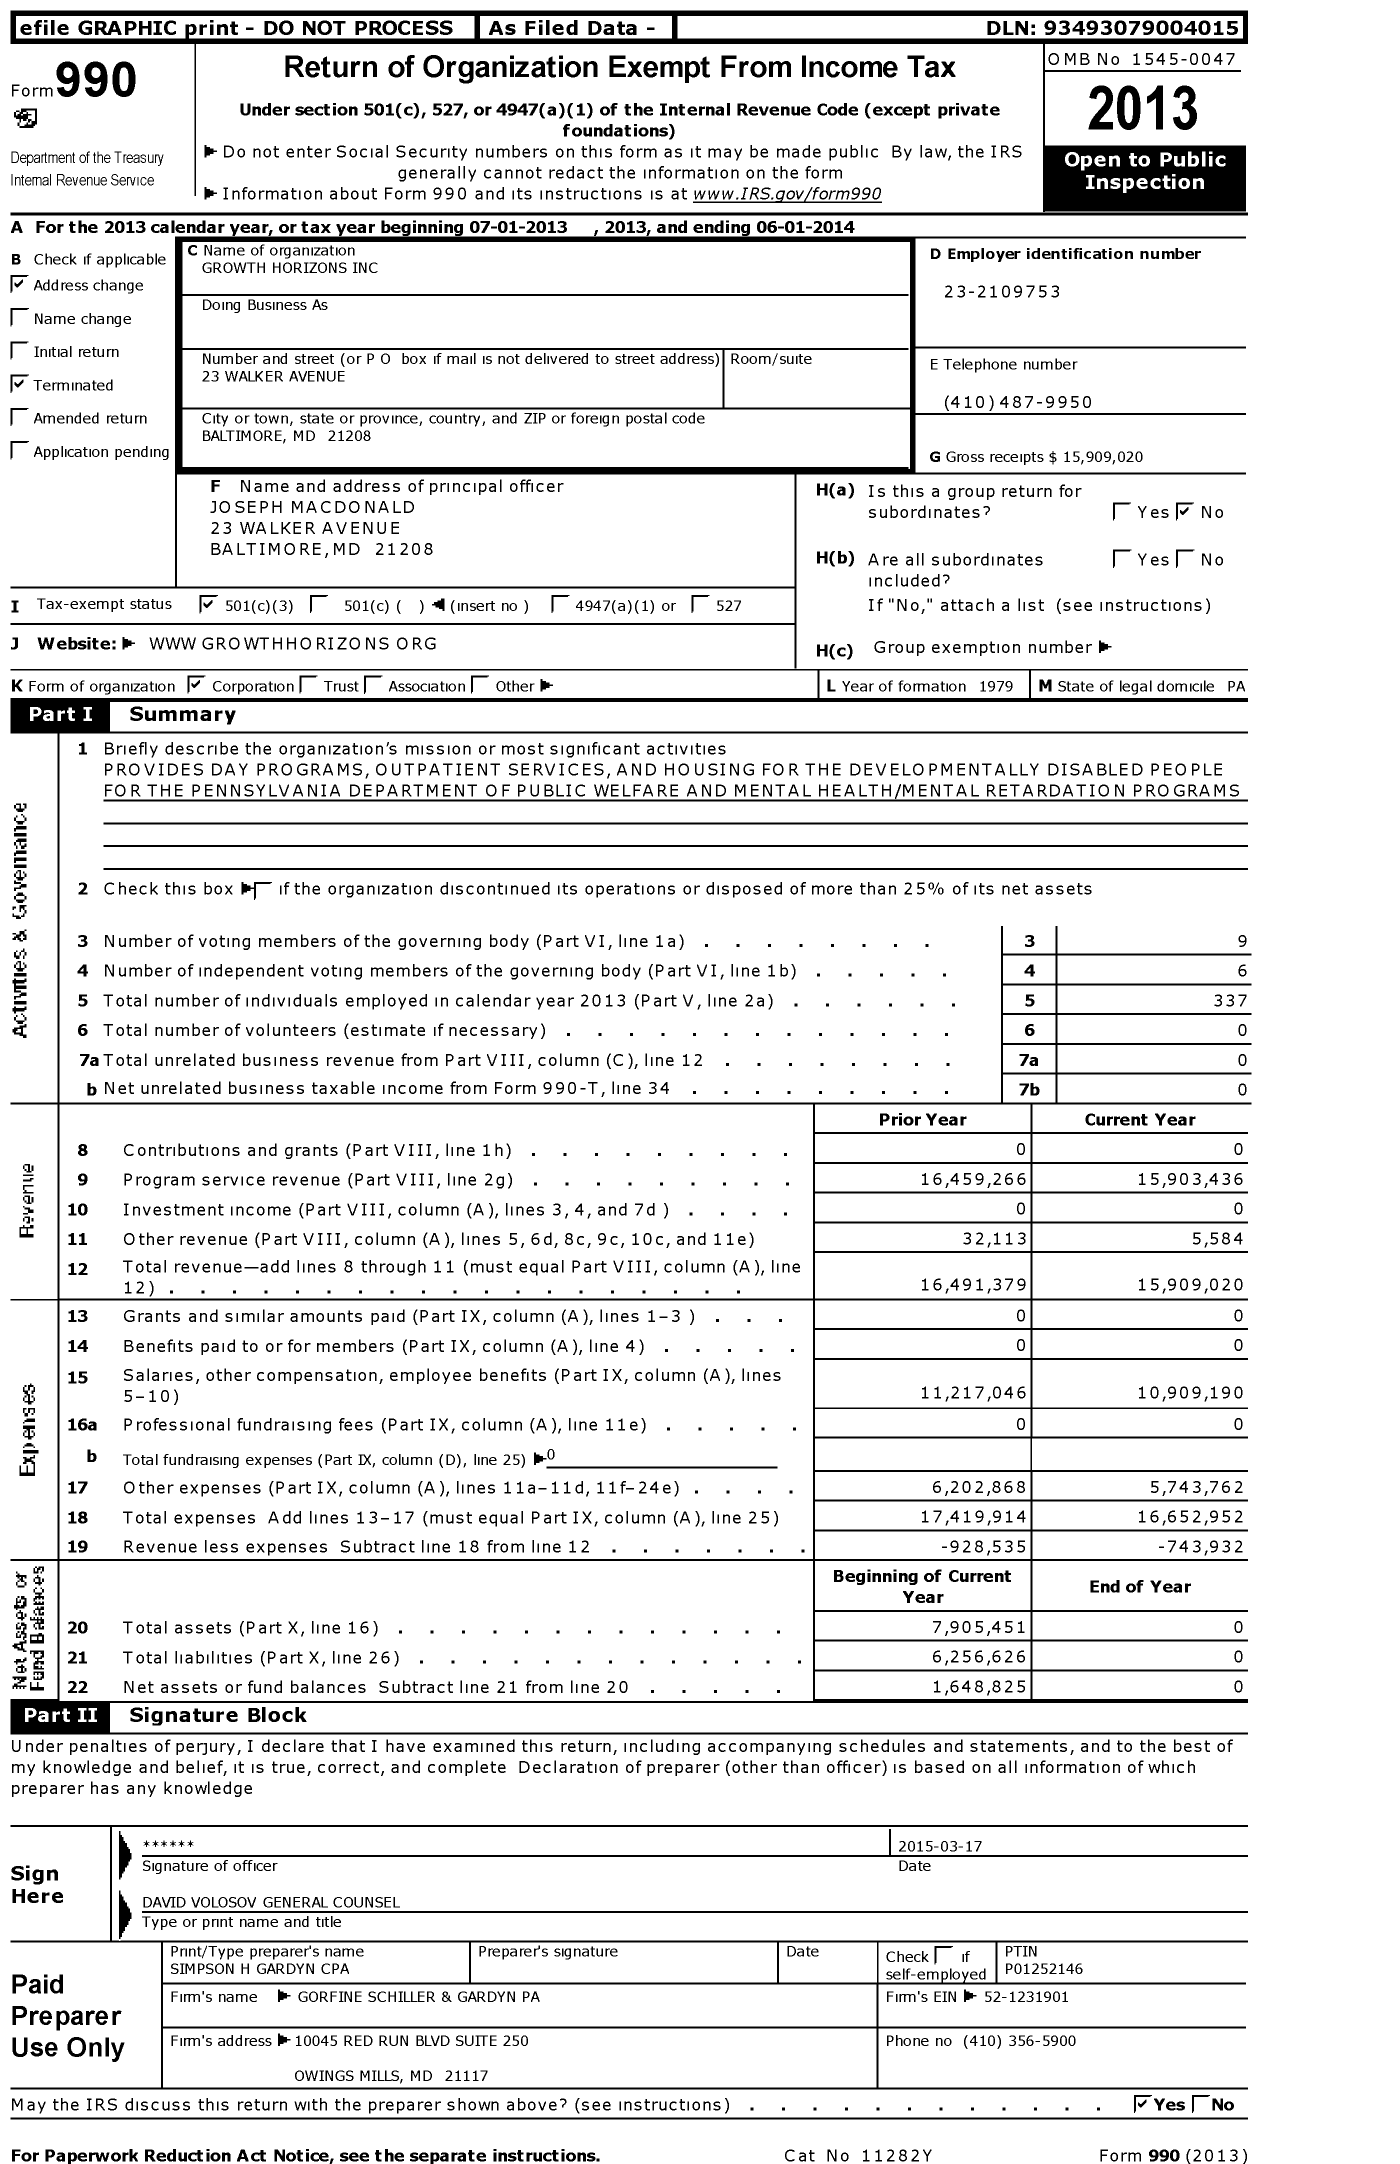 Image of first page of 2013 Form 990 for Growth Horizons